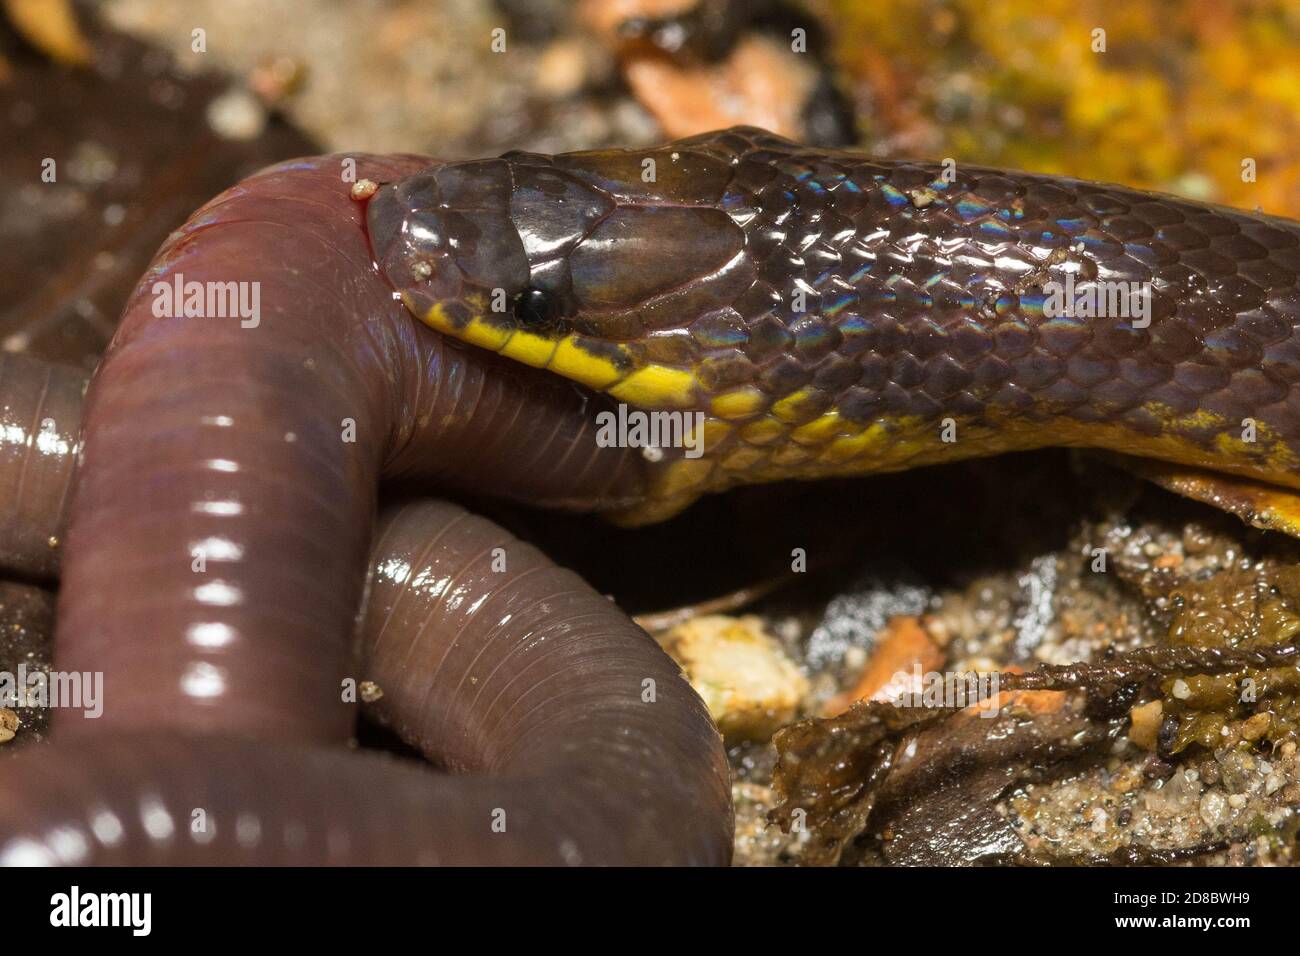 A close up image of Dunns groundsnake (Atractus dunni) swallowing a worm in the wild. Stock Photo